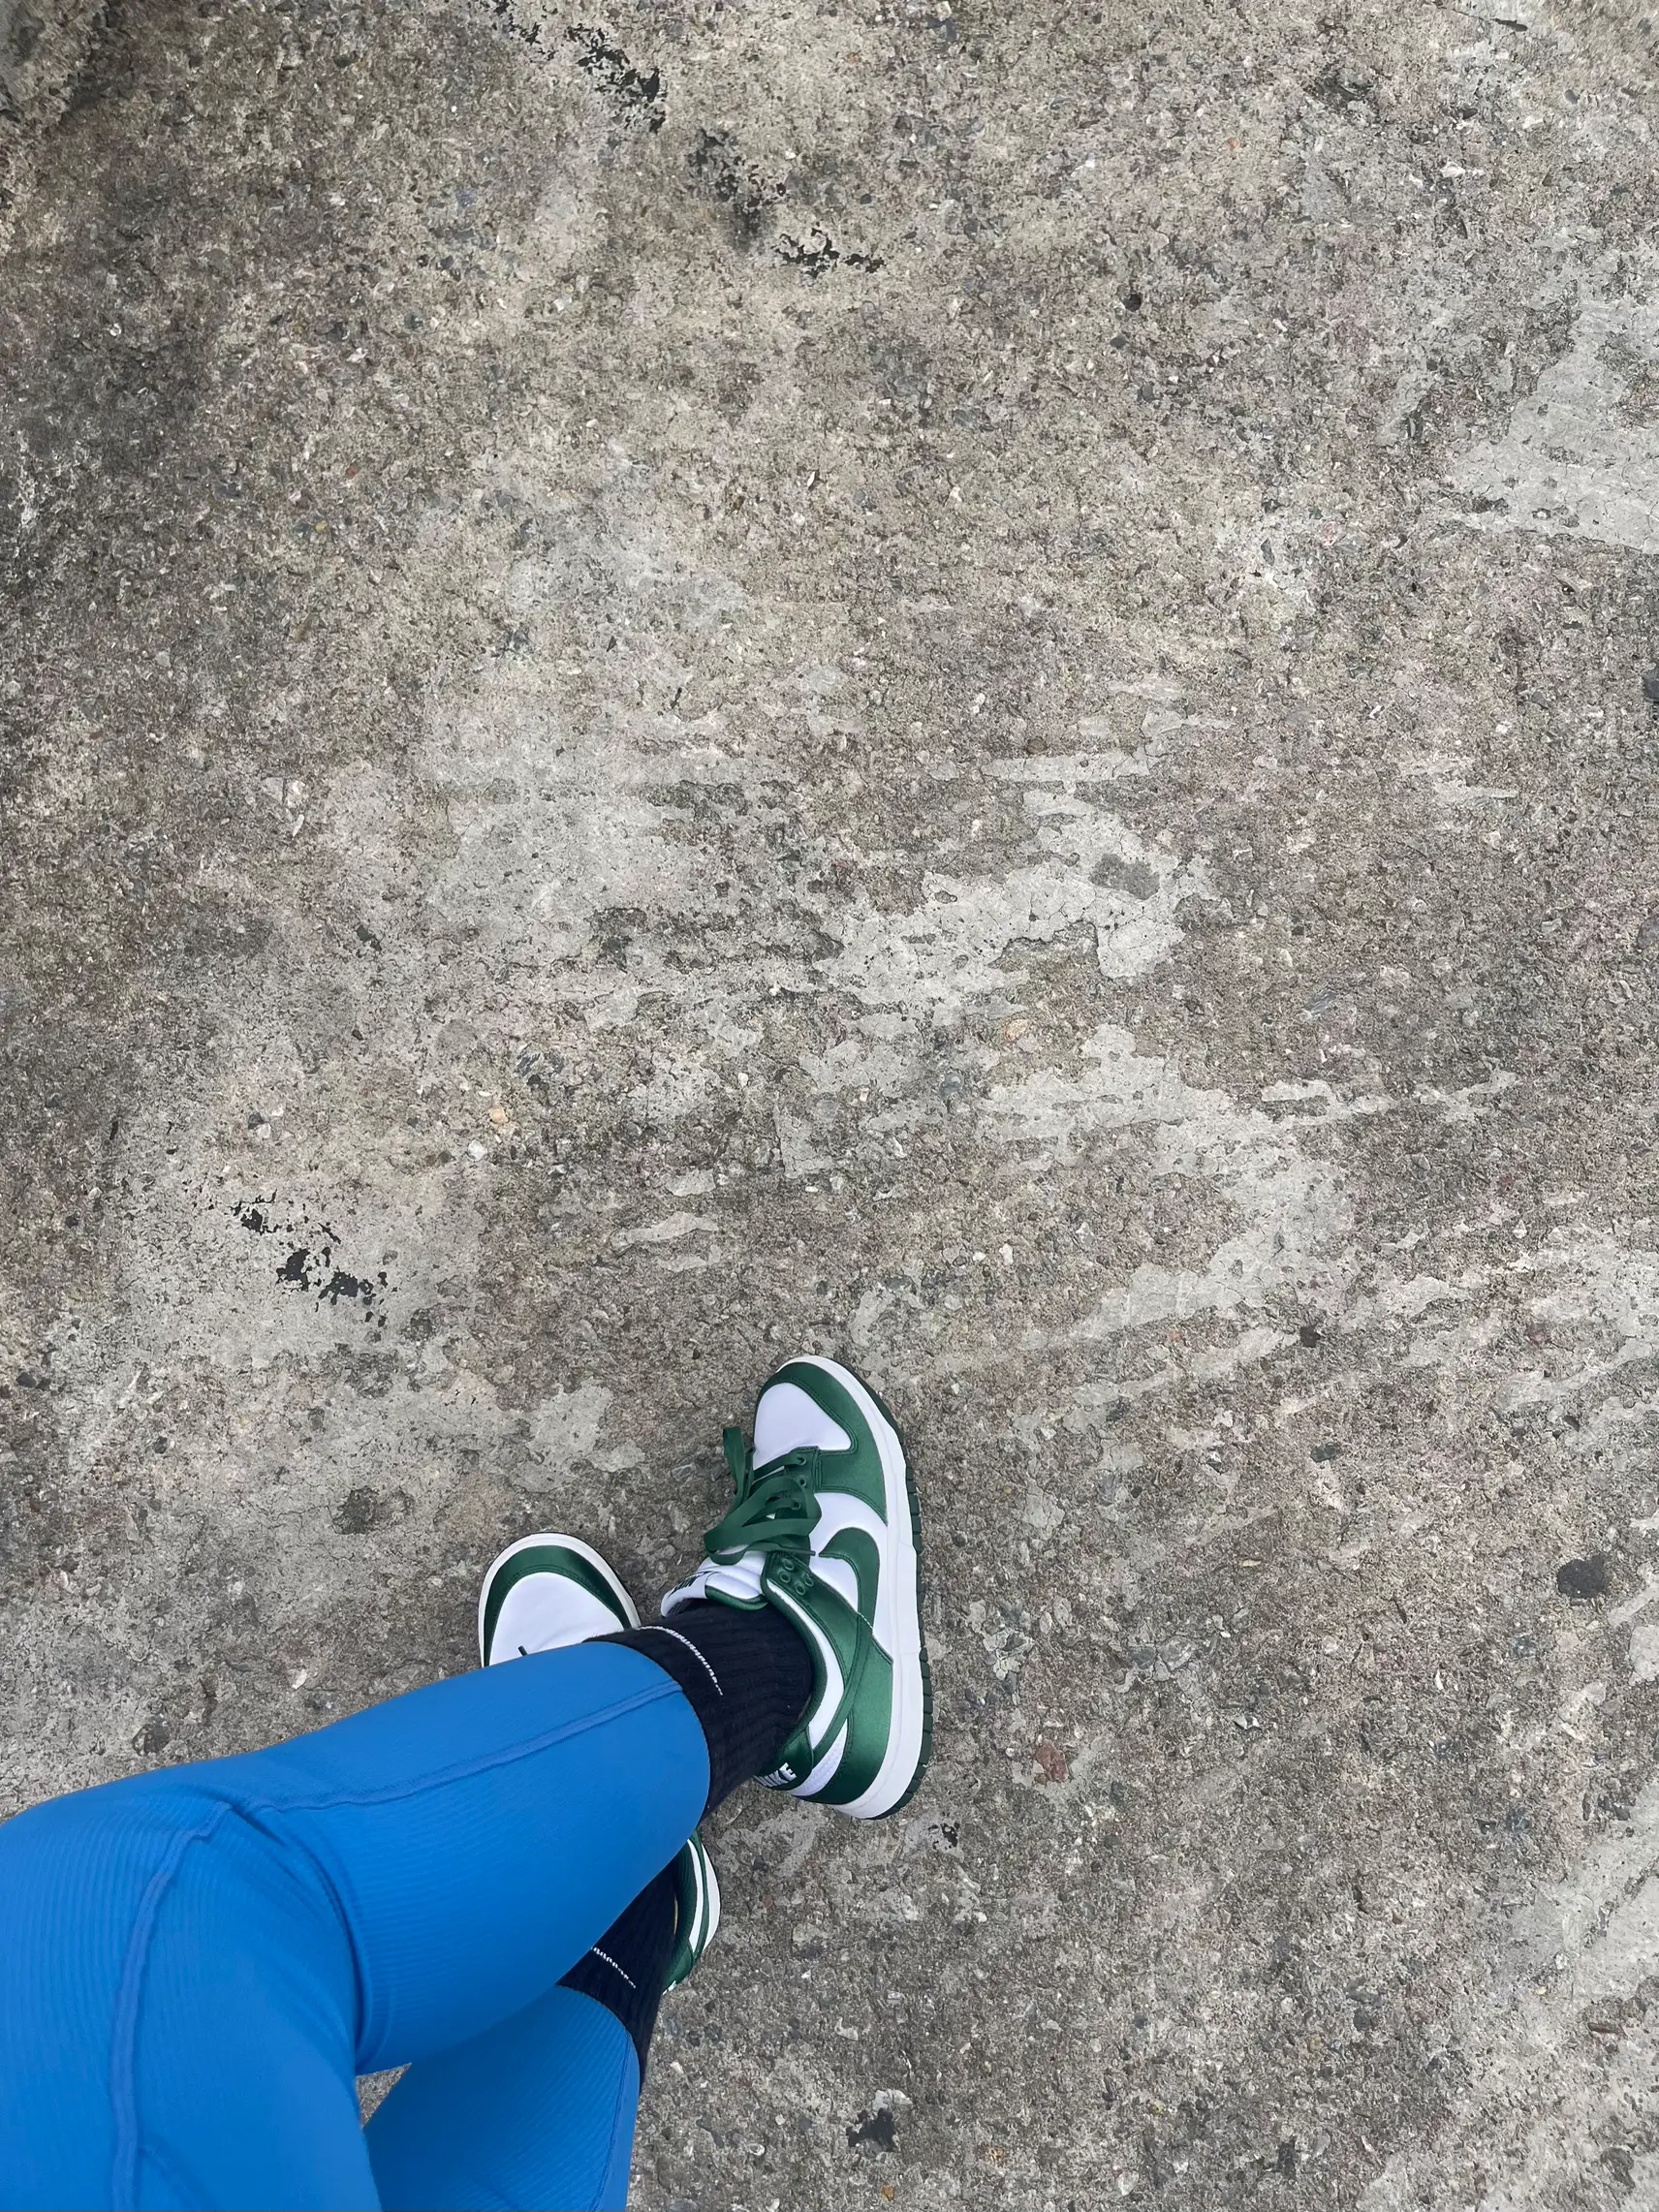 Nike Dunk Low Spartan Green (Varsity Green): Review & On-Feet 